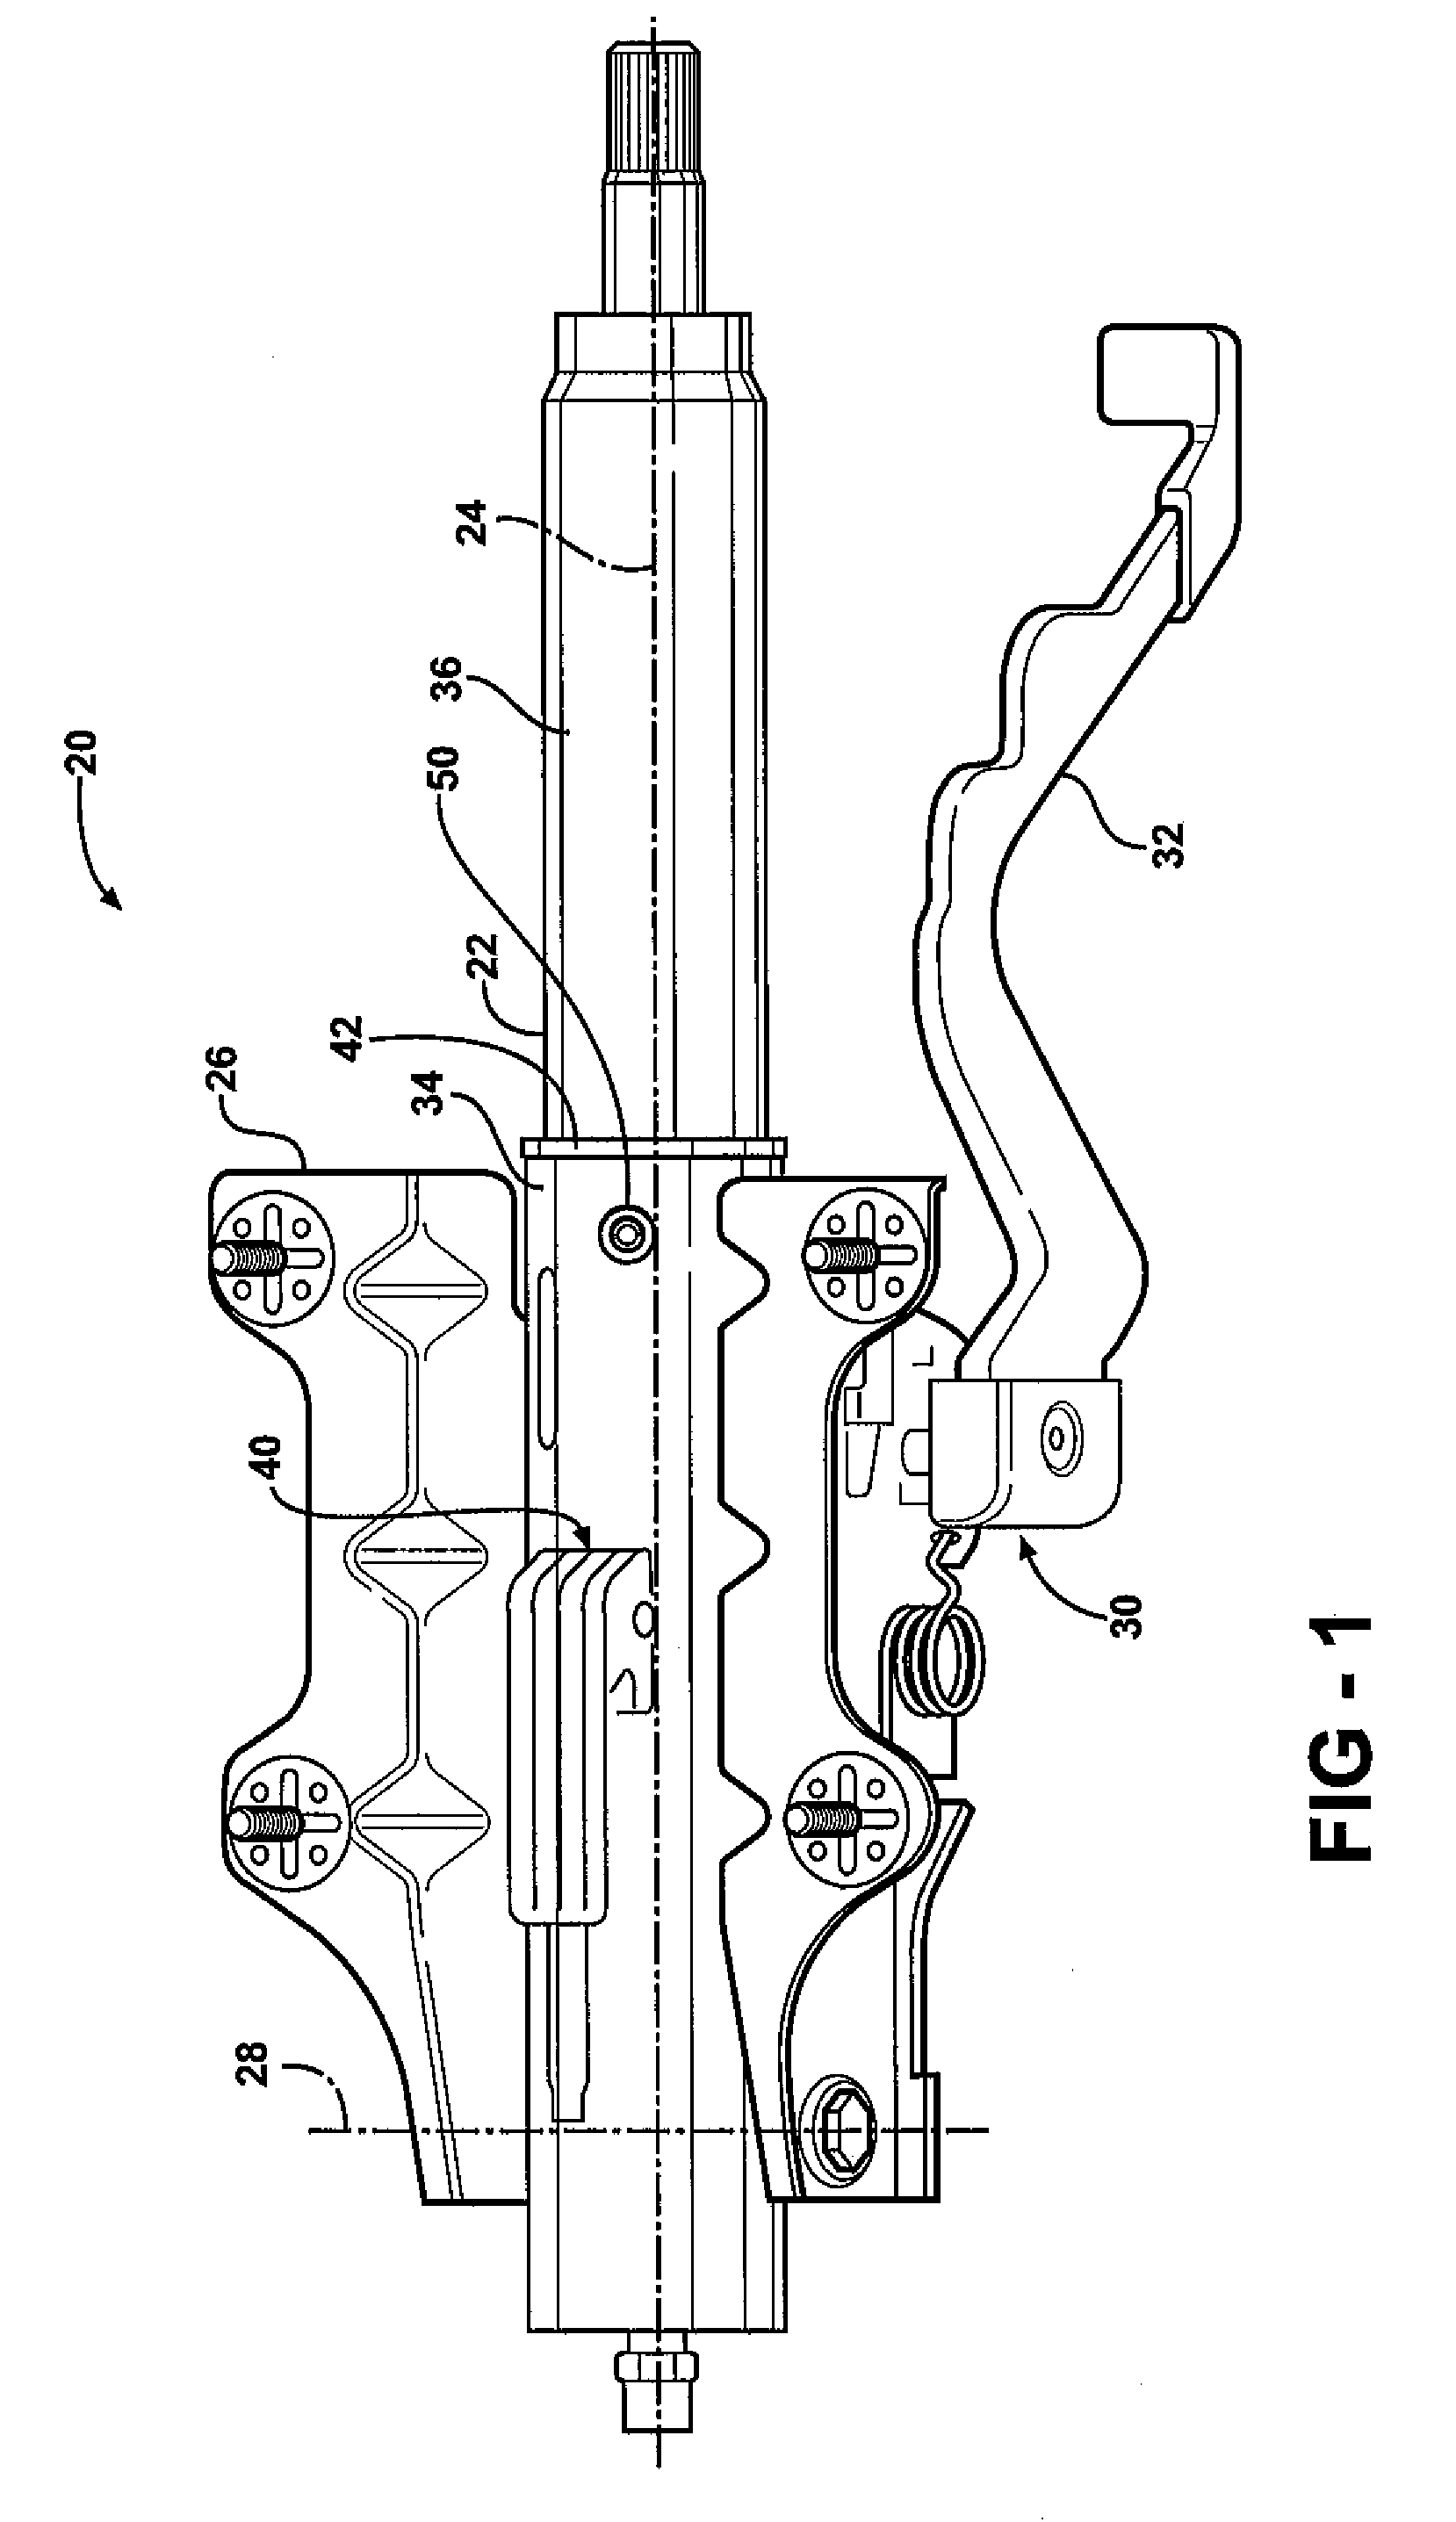 Steering column assembly with shearable jacket connector